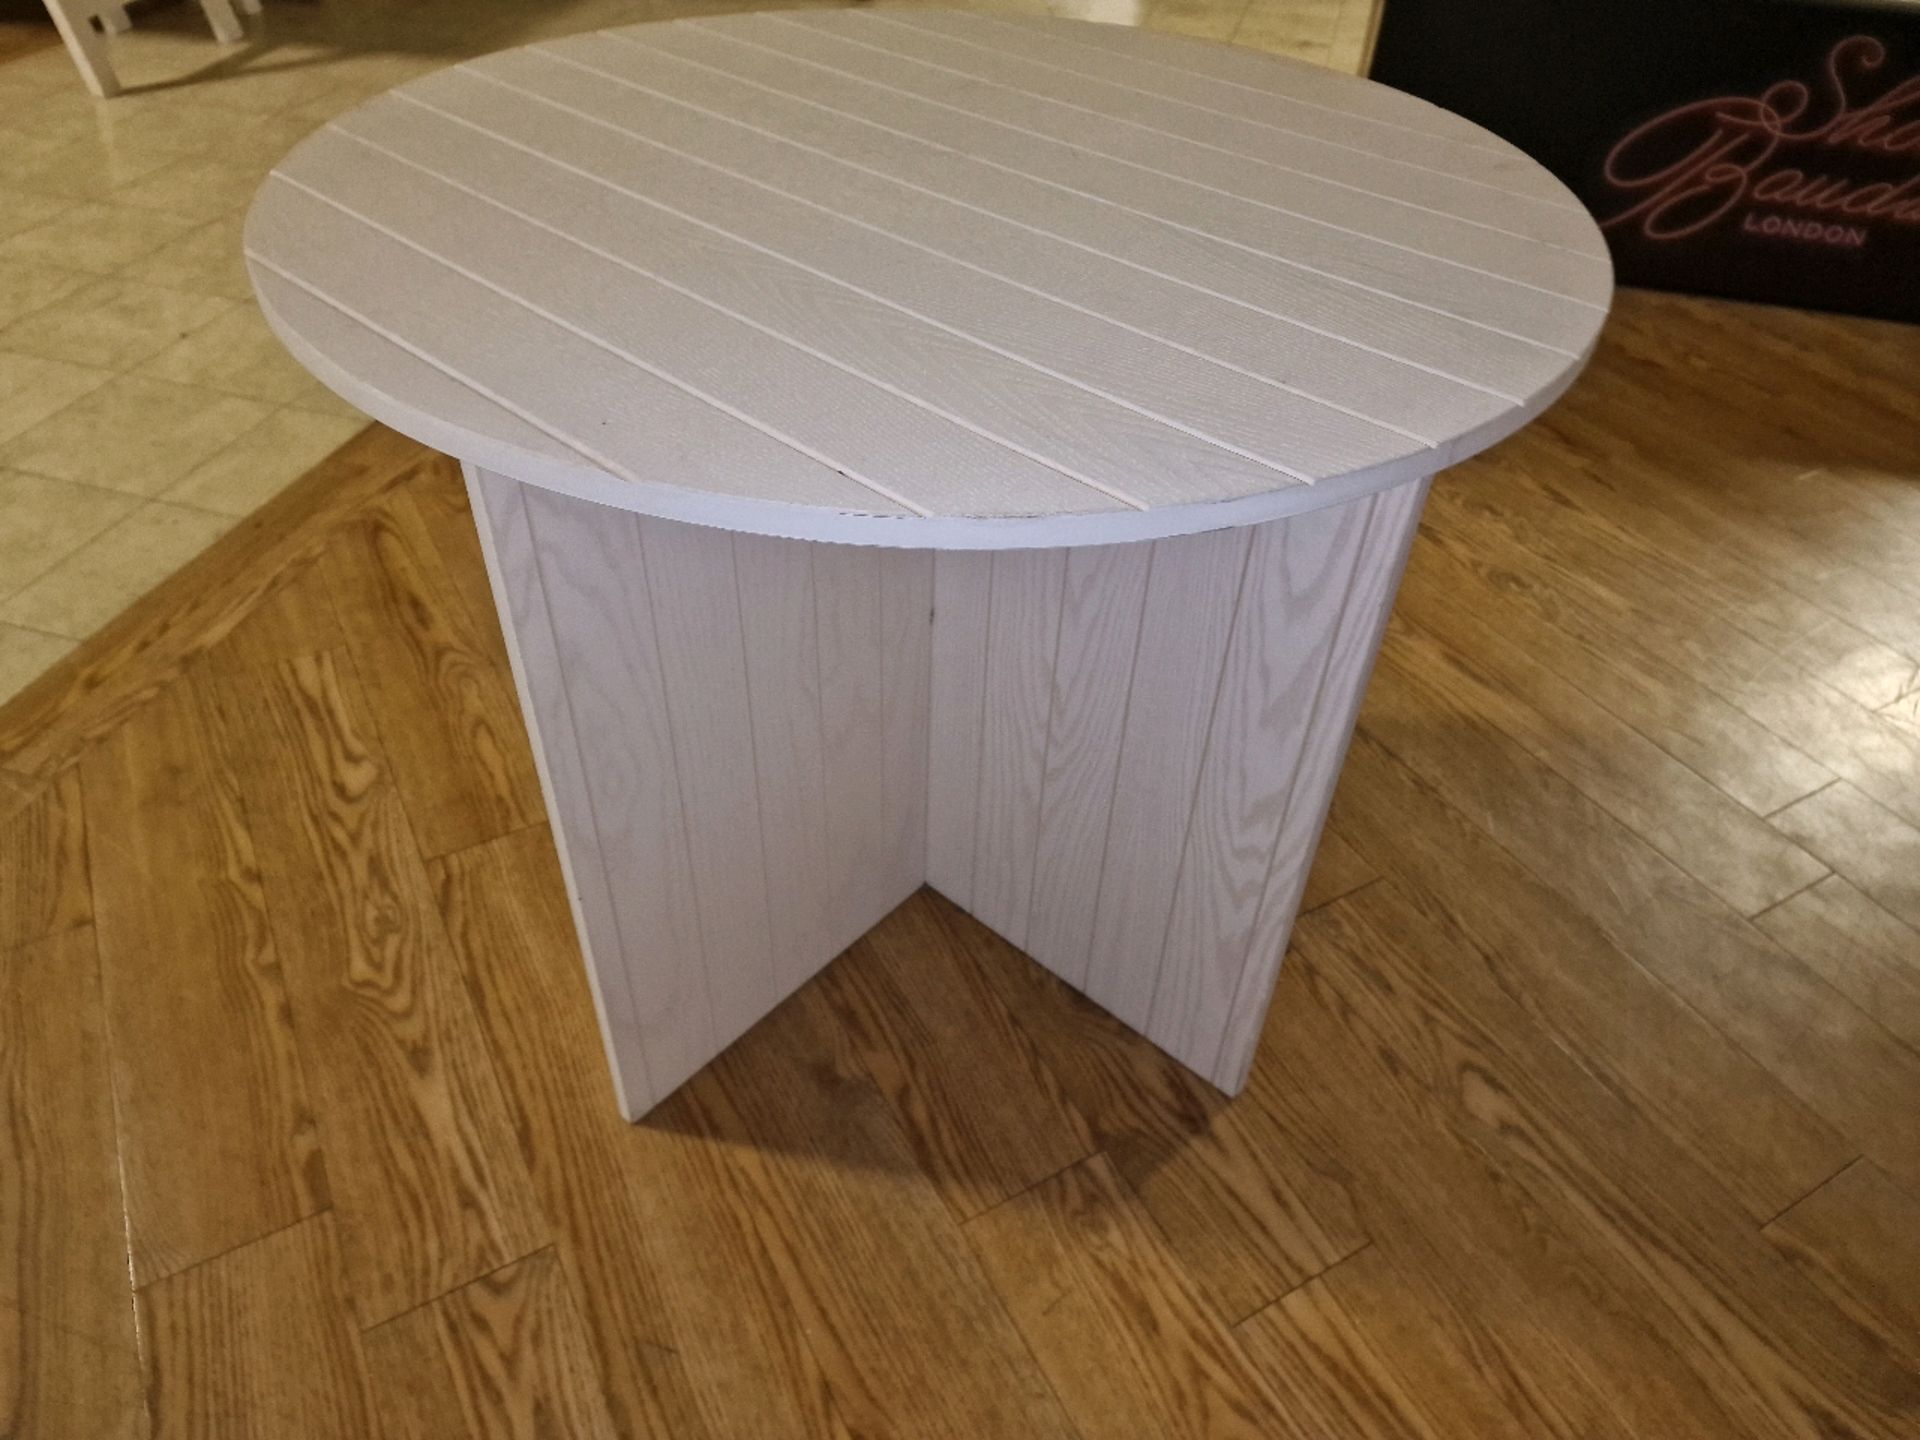 Wooden Round Slatted Table - Image 2 of 3